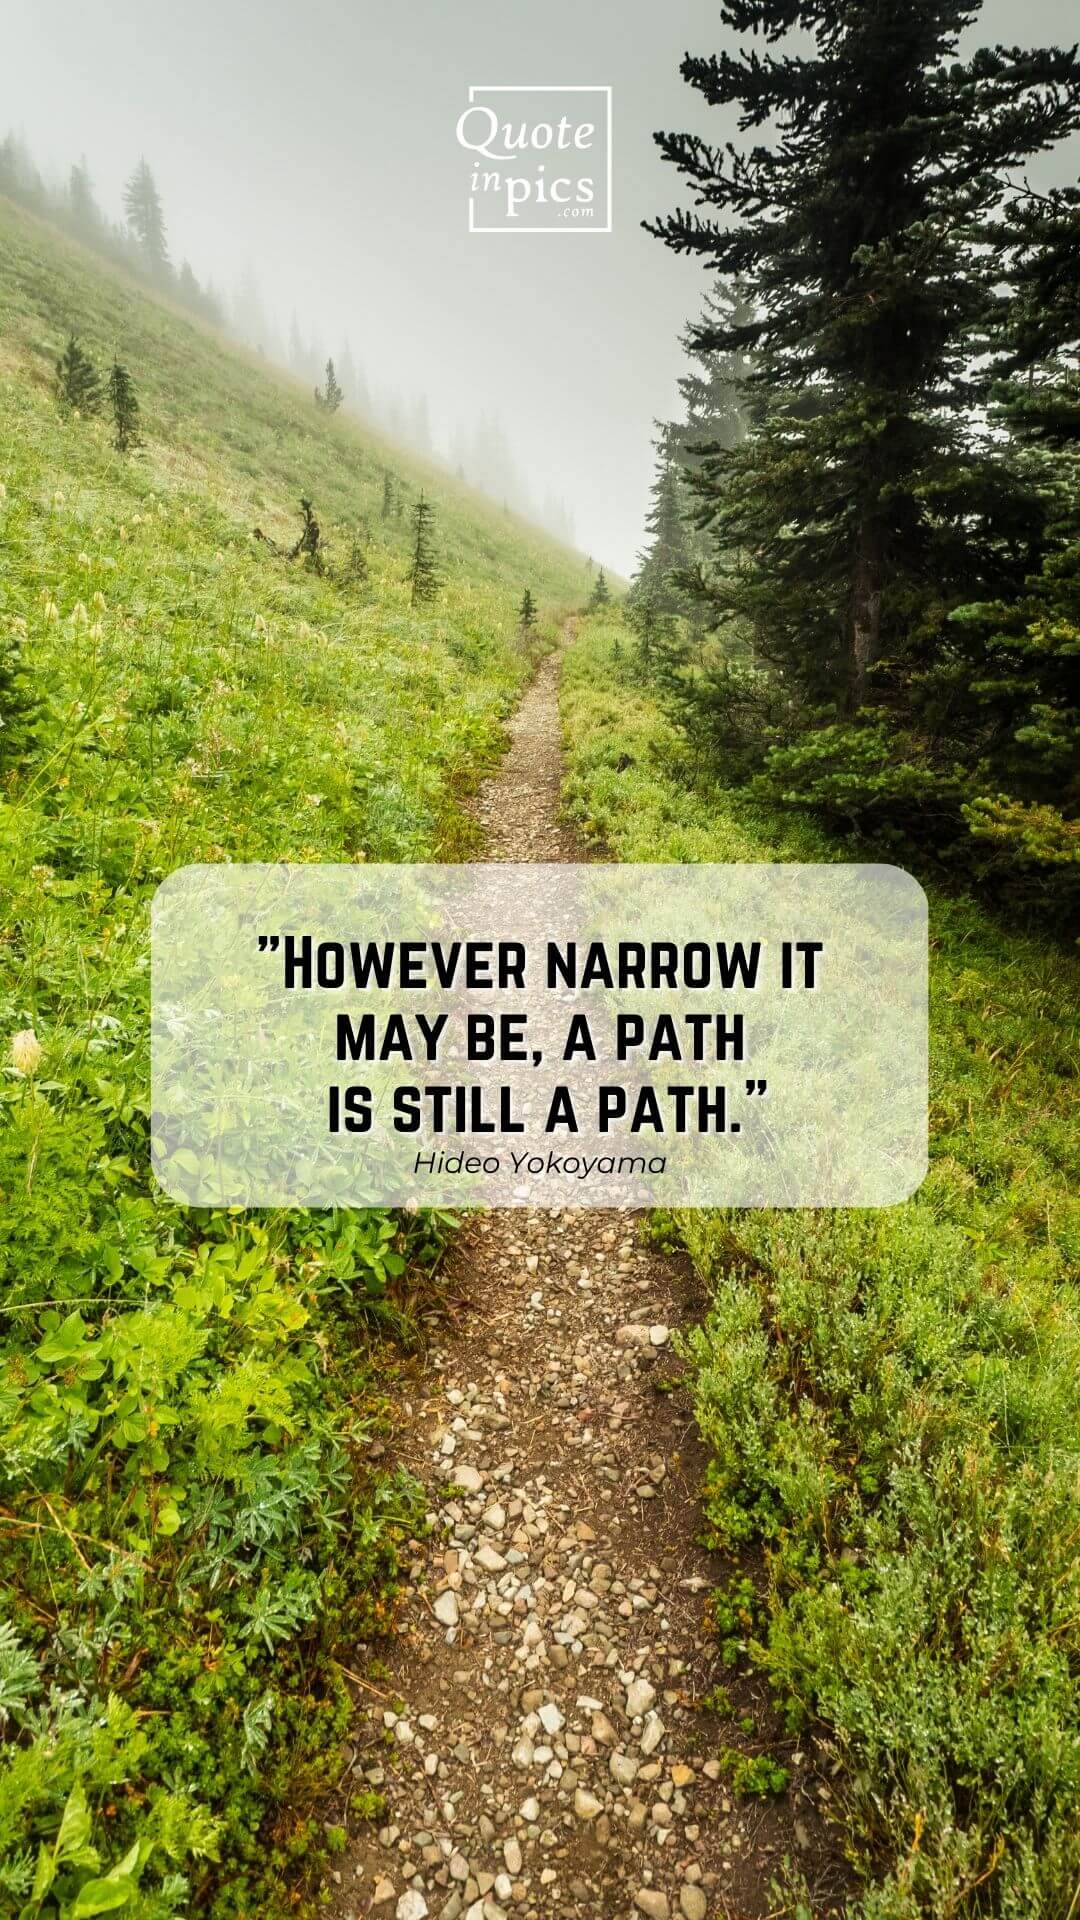 However narrow it may be, a path is still a path